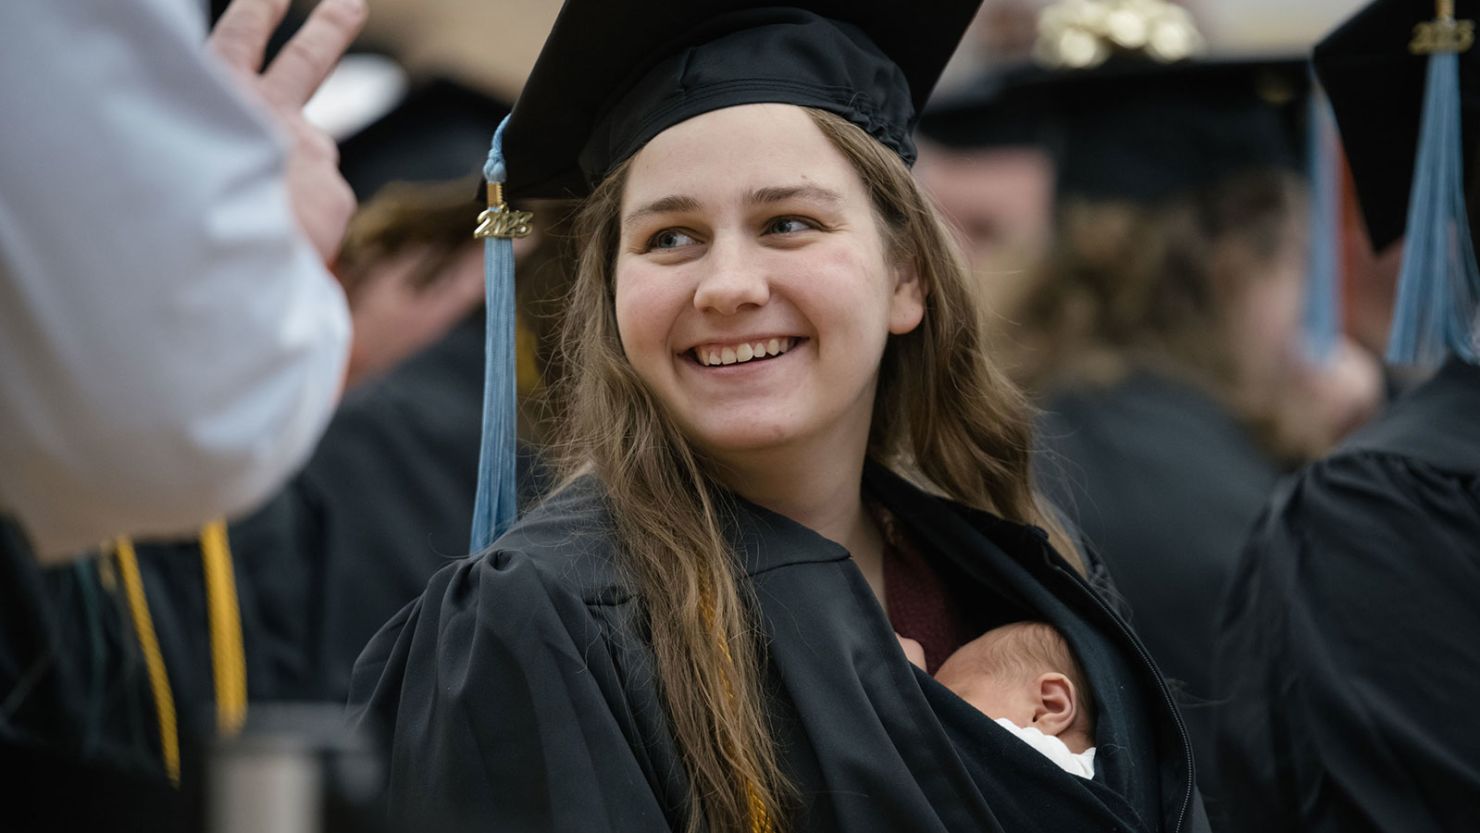 Grace Szymchack graduated from Ferris State University on December 15 with her newborn, Annabelle, tucked into her gown.